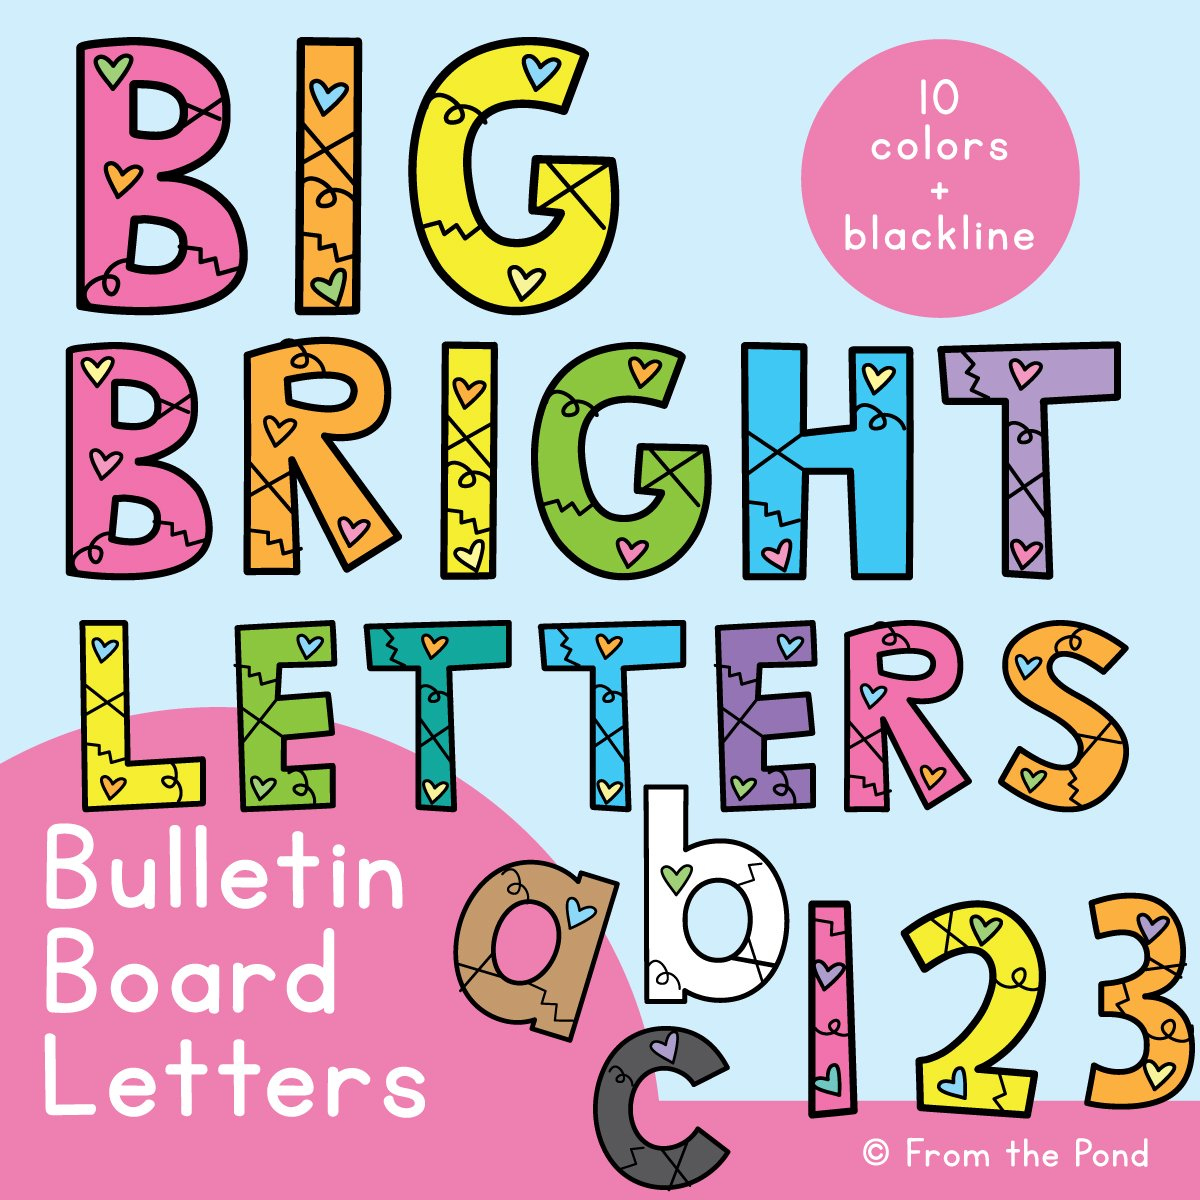 Bulletin Board Letters For The Classroom - Just Print And Display in Free Printable Letters For Bulletin Boards